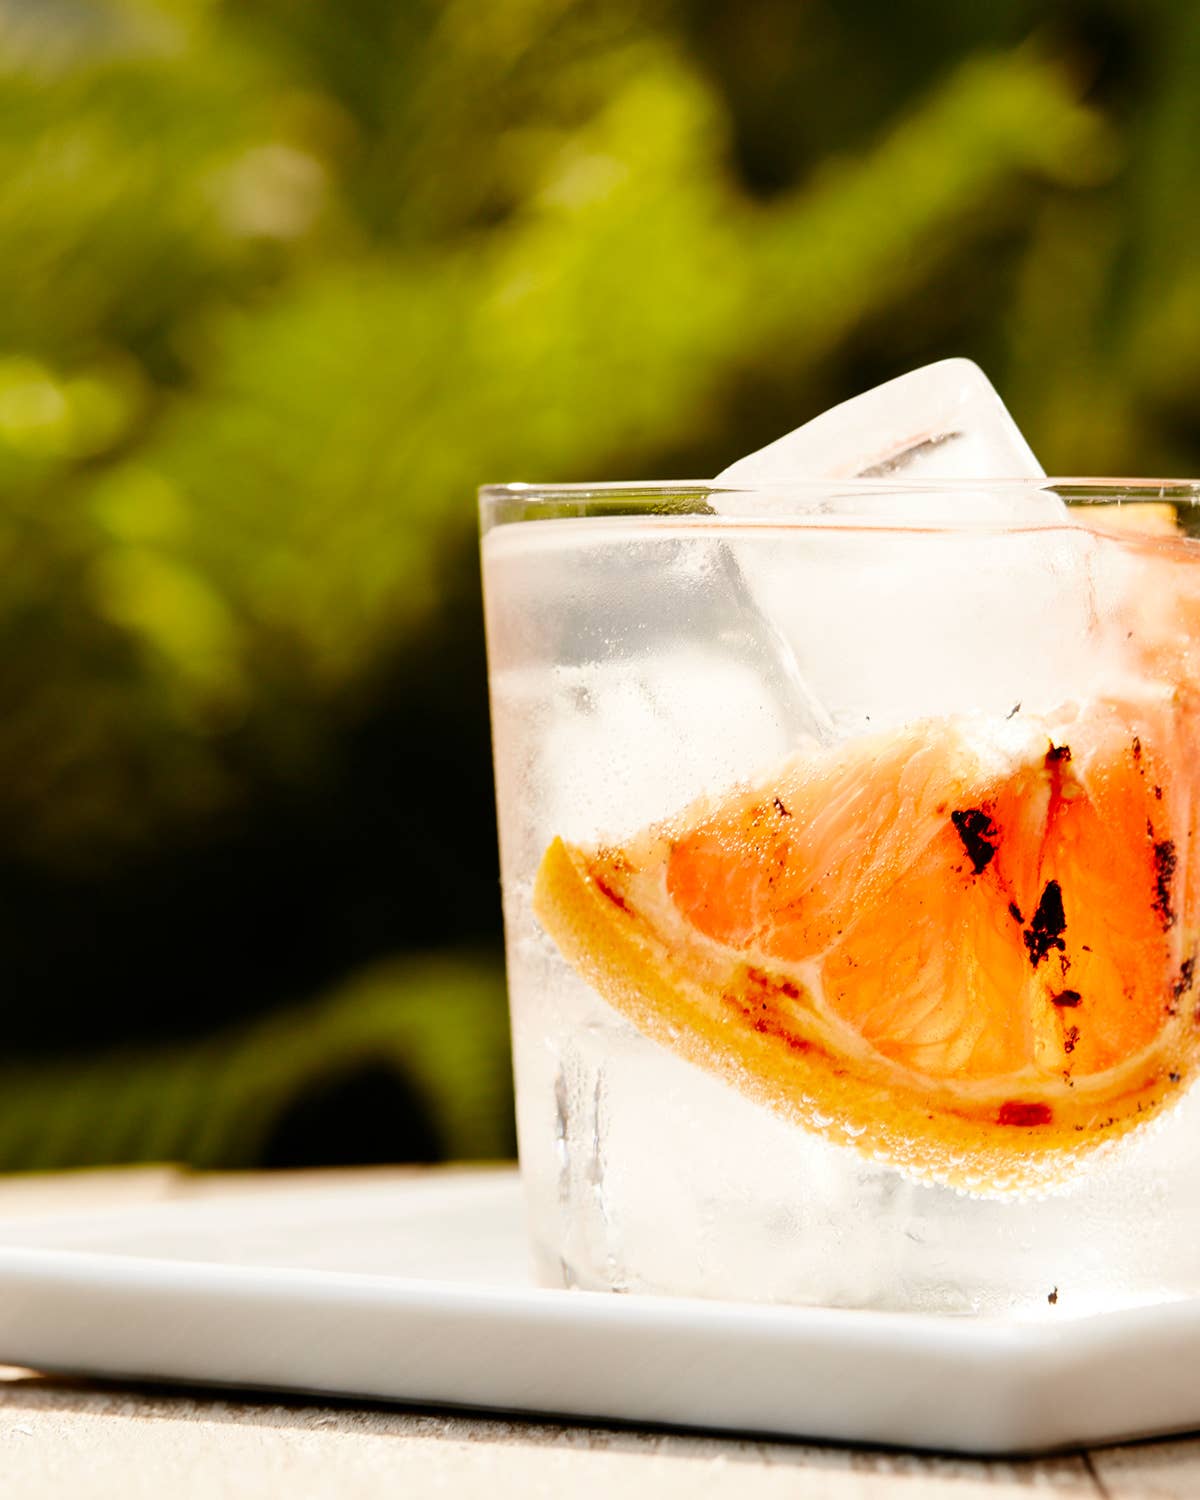 The Case for Grilling Your Cocktails